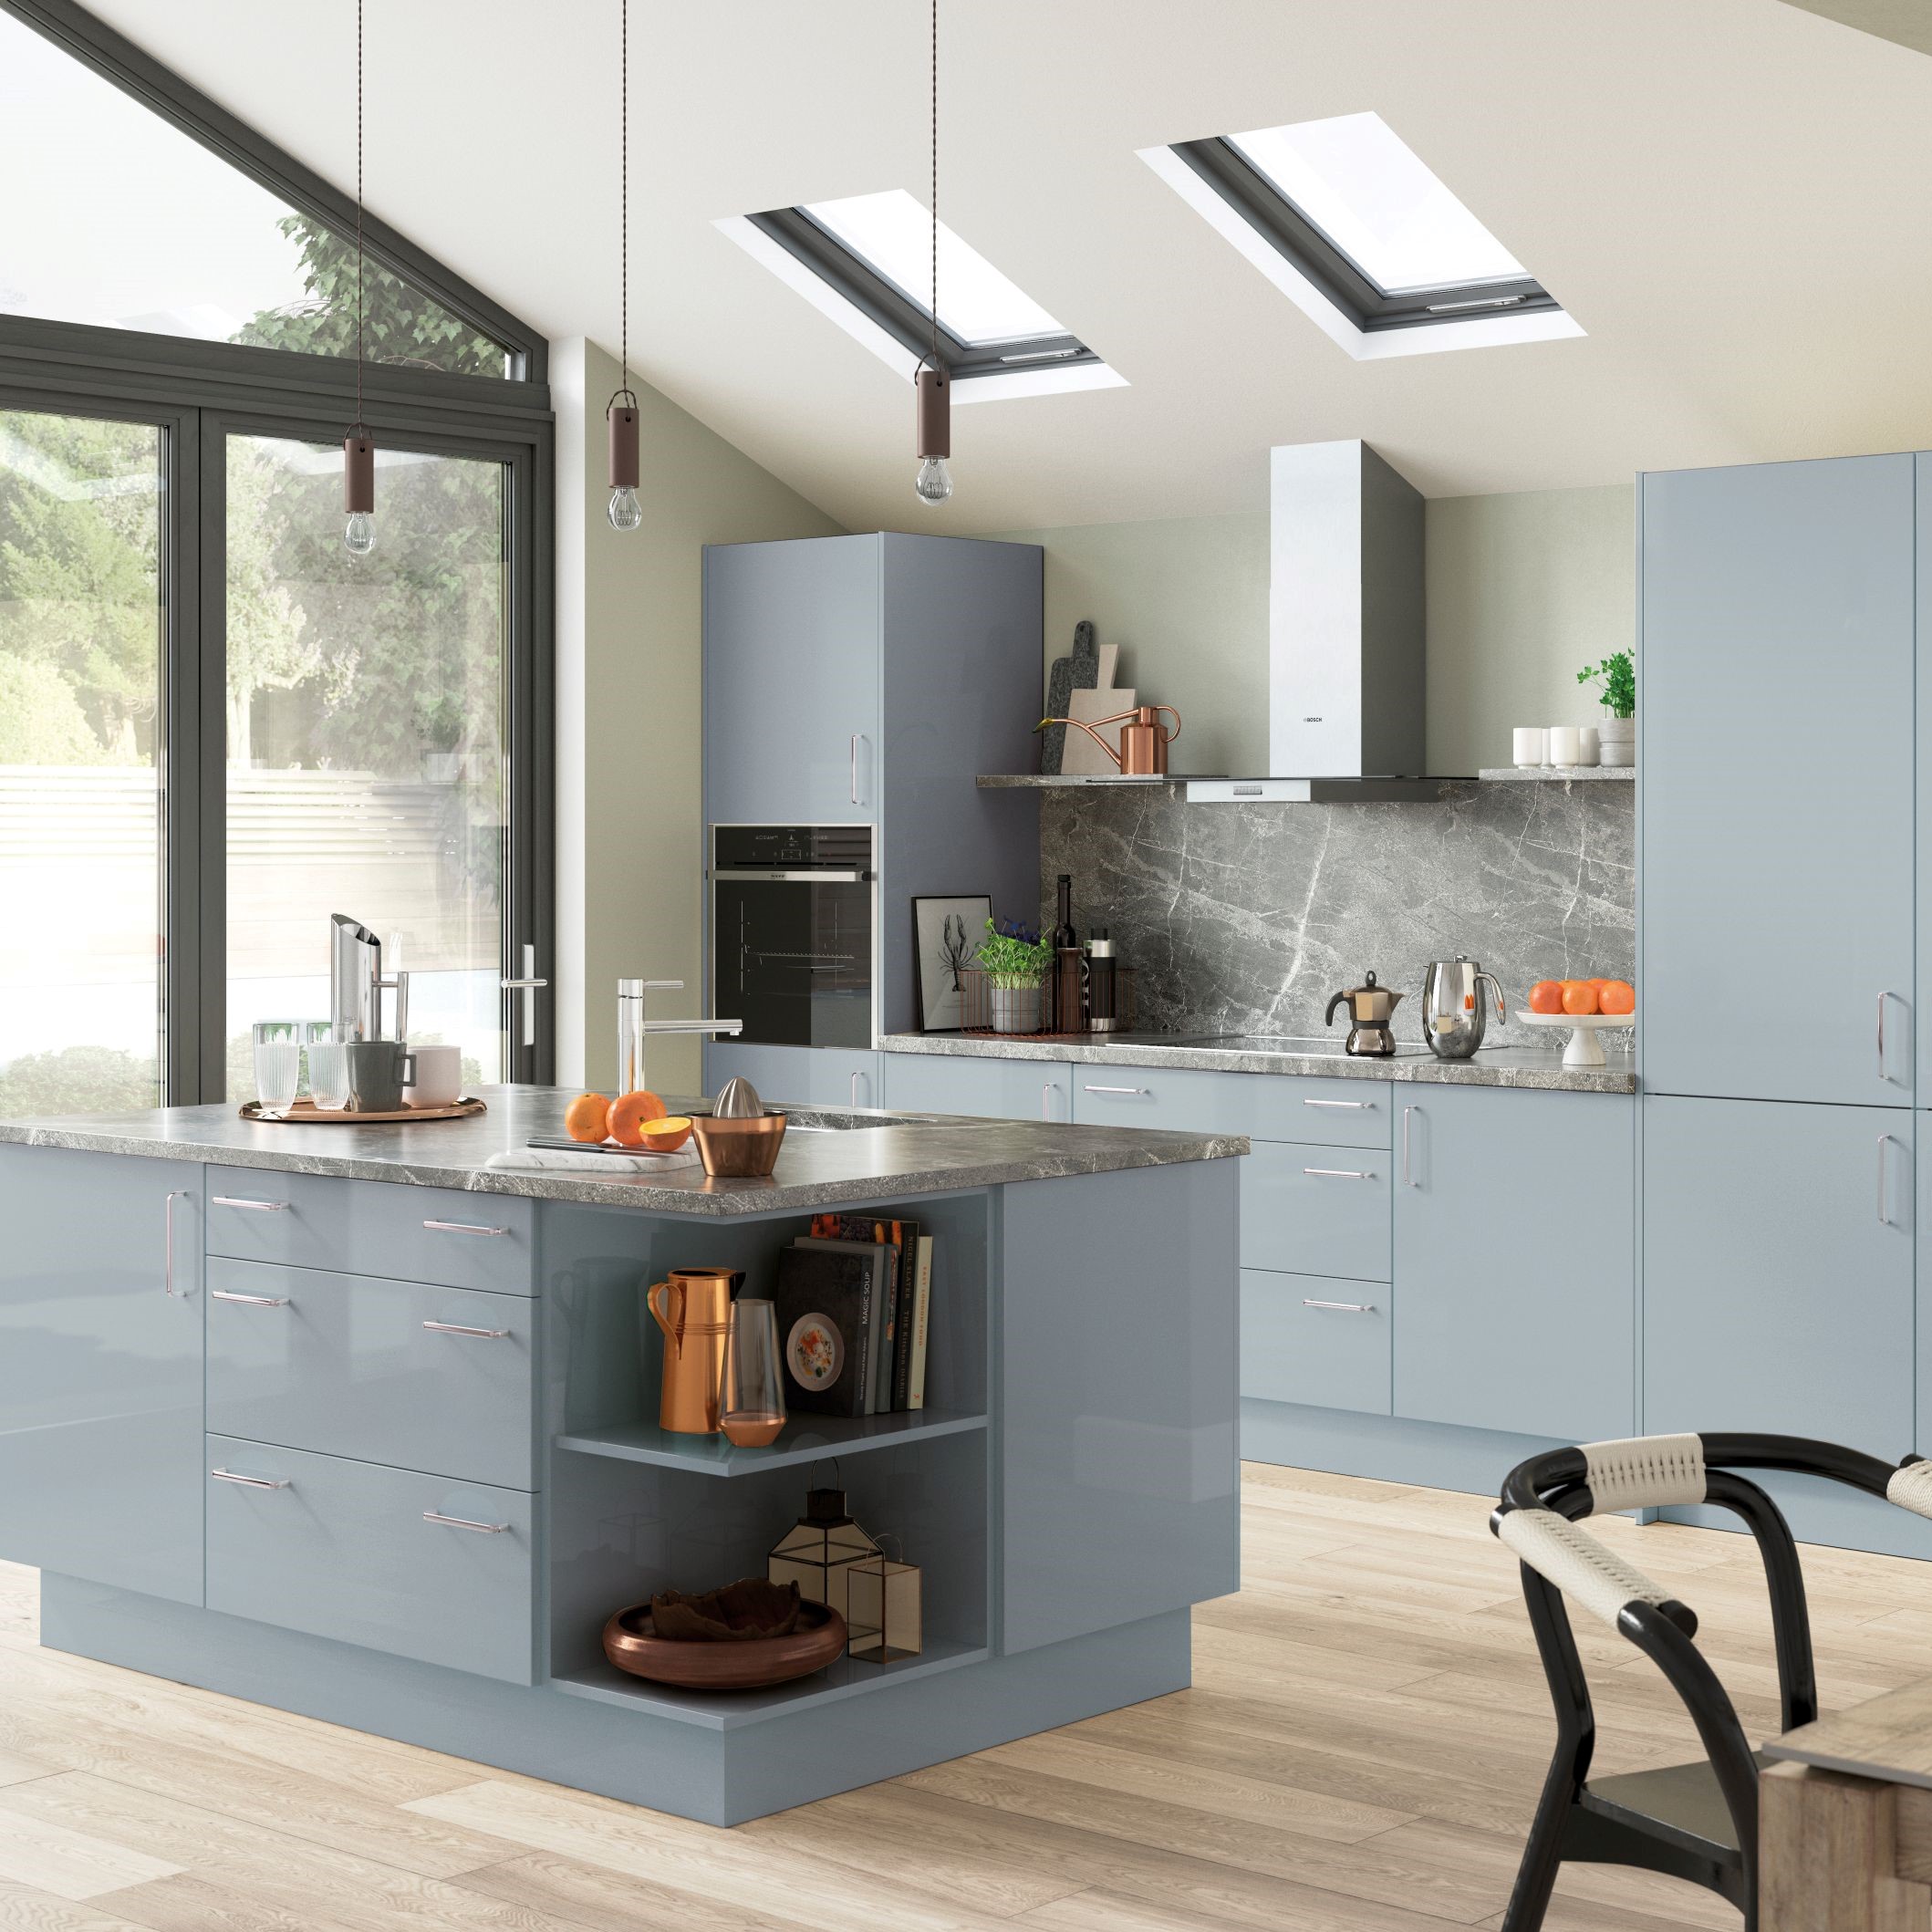 Ethos 5G Kitchens by O&S Doors